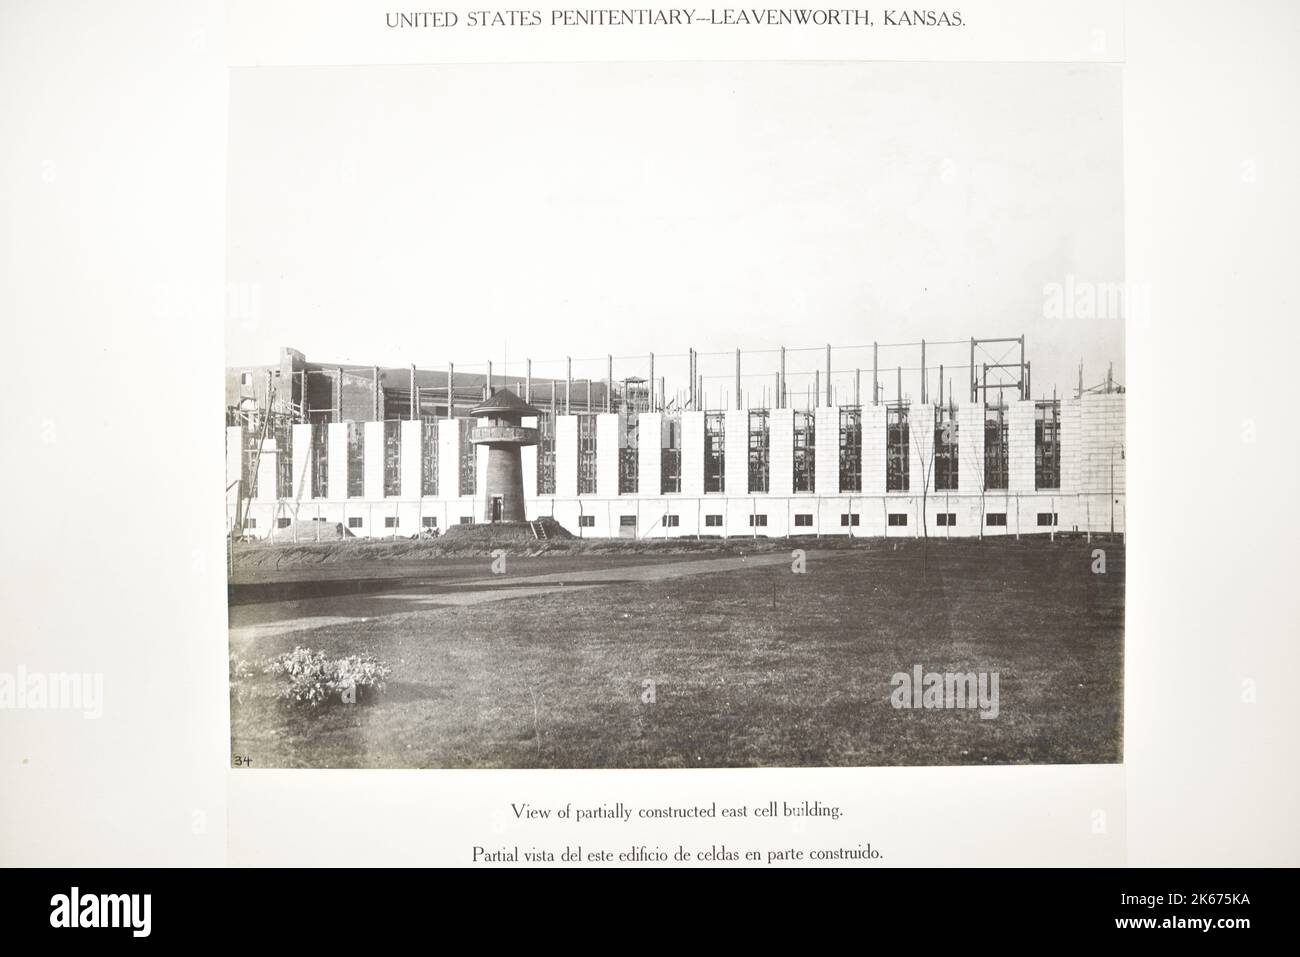 United States Penitentiary - Leavenworth, Kansas: View of Partially ...